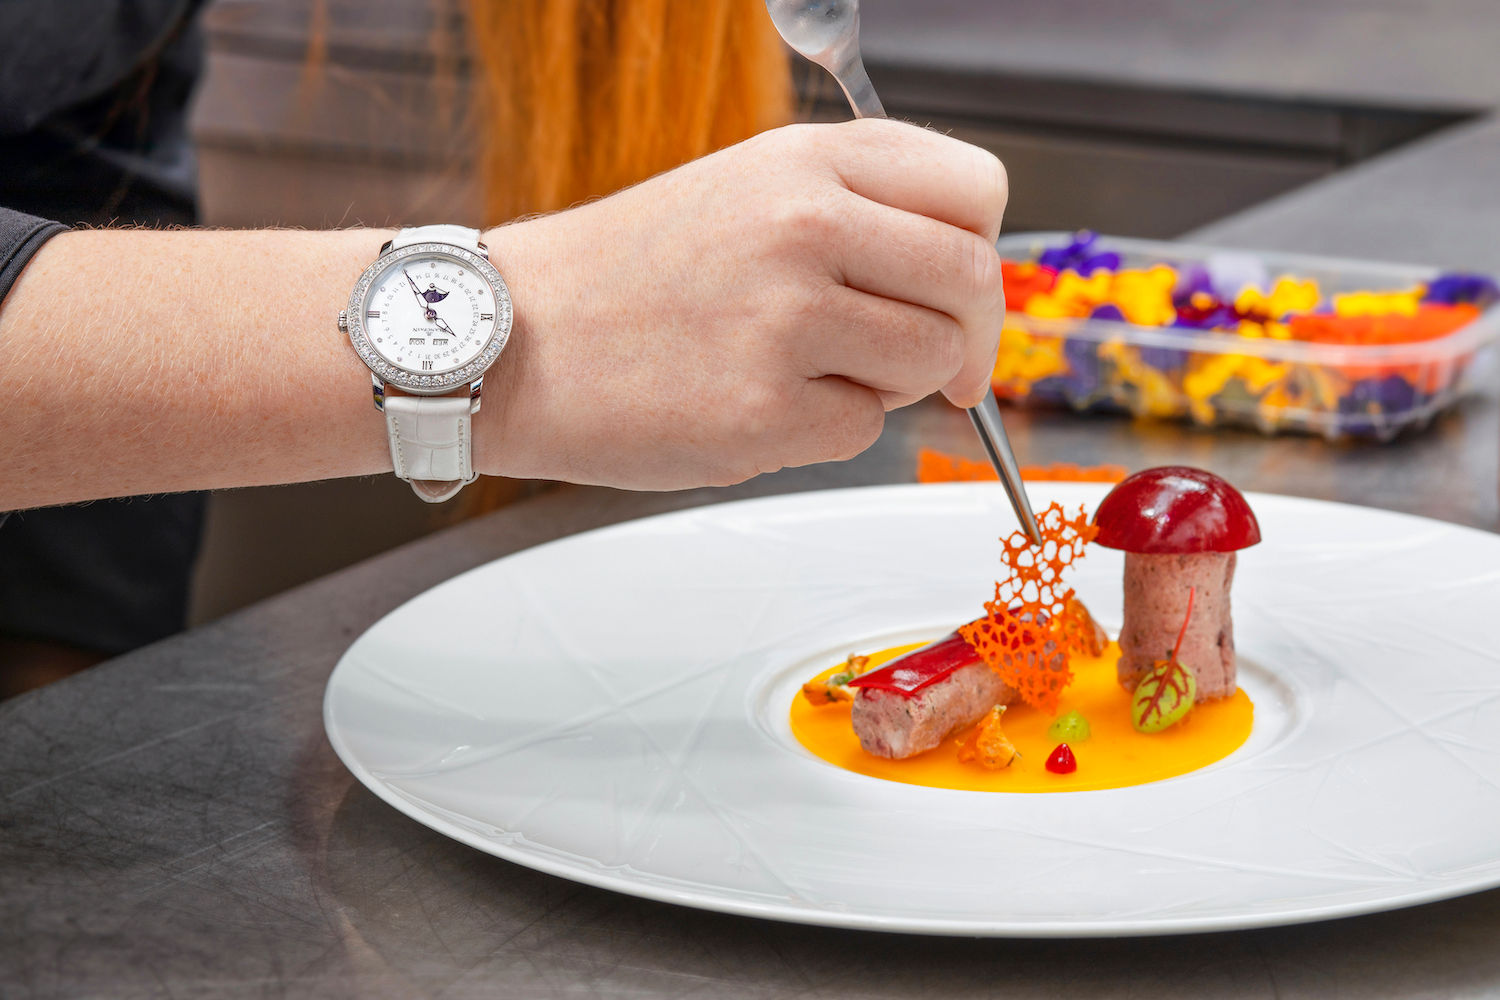 Haute Cuisine Meets Horology as Blancpain Partners with the Michelin Guide